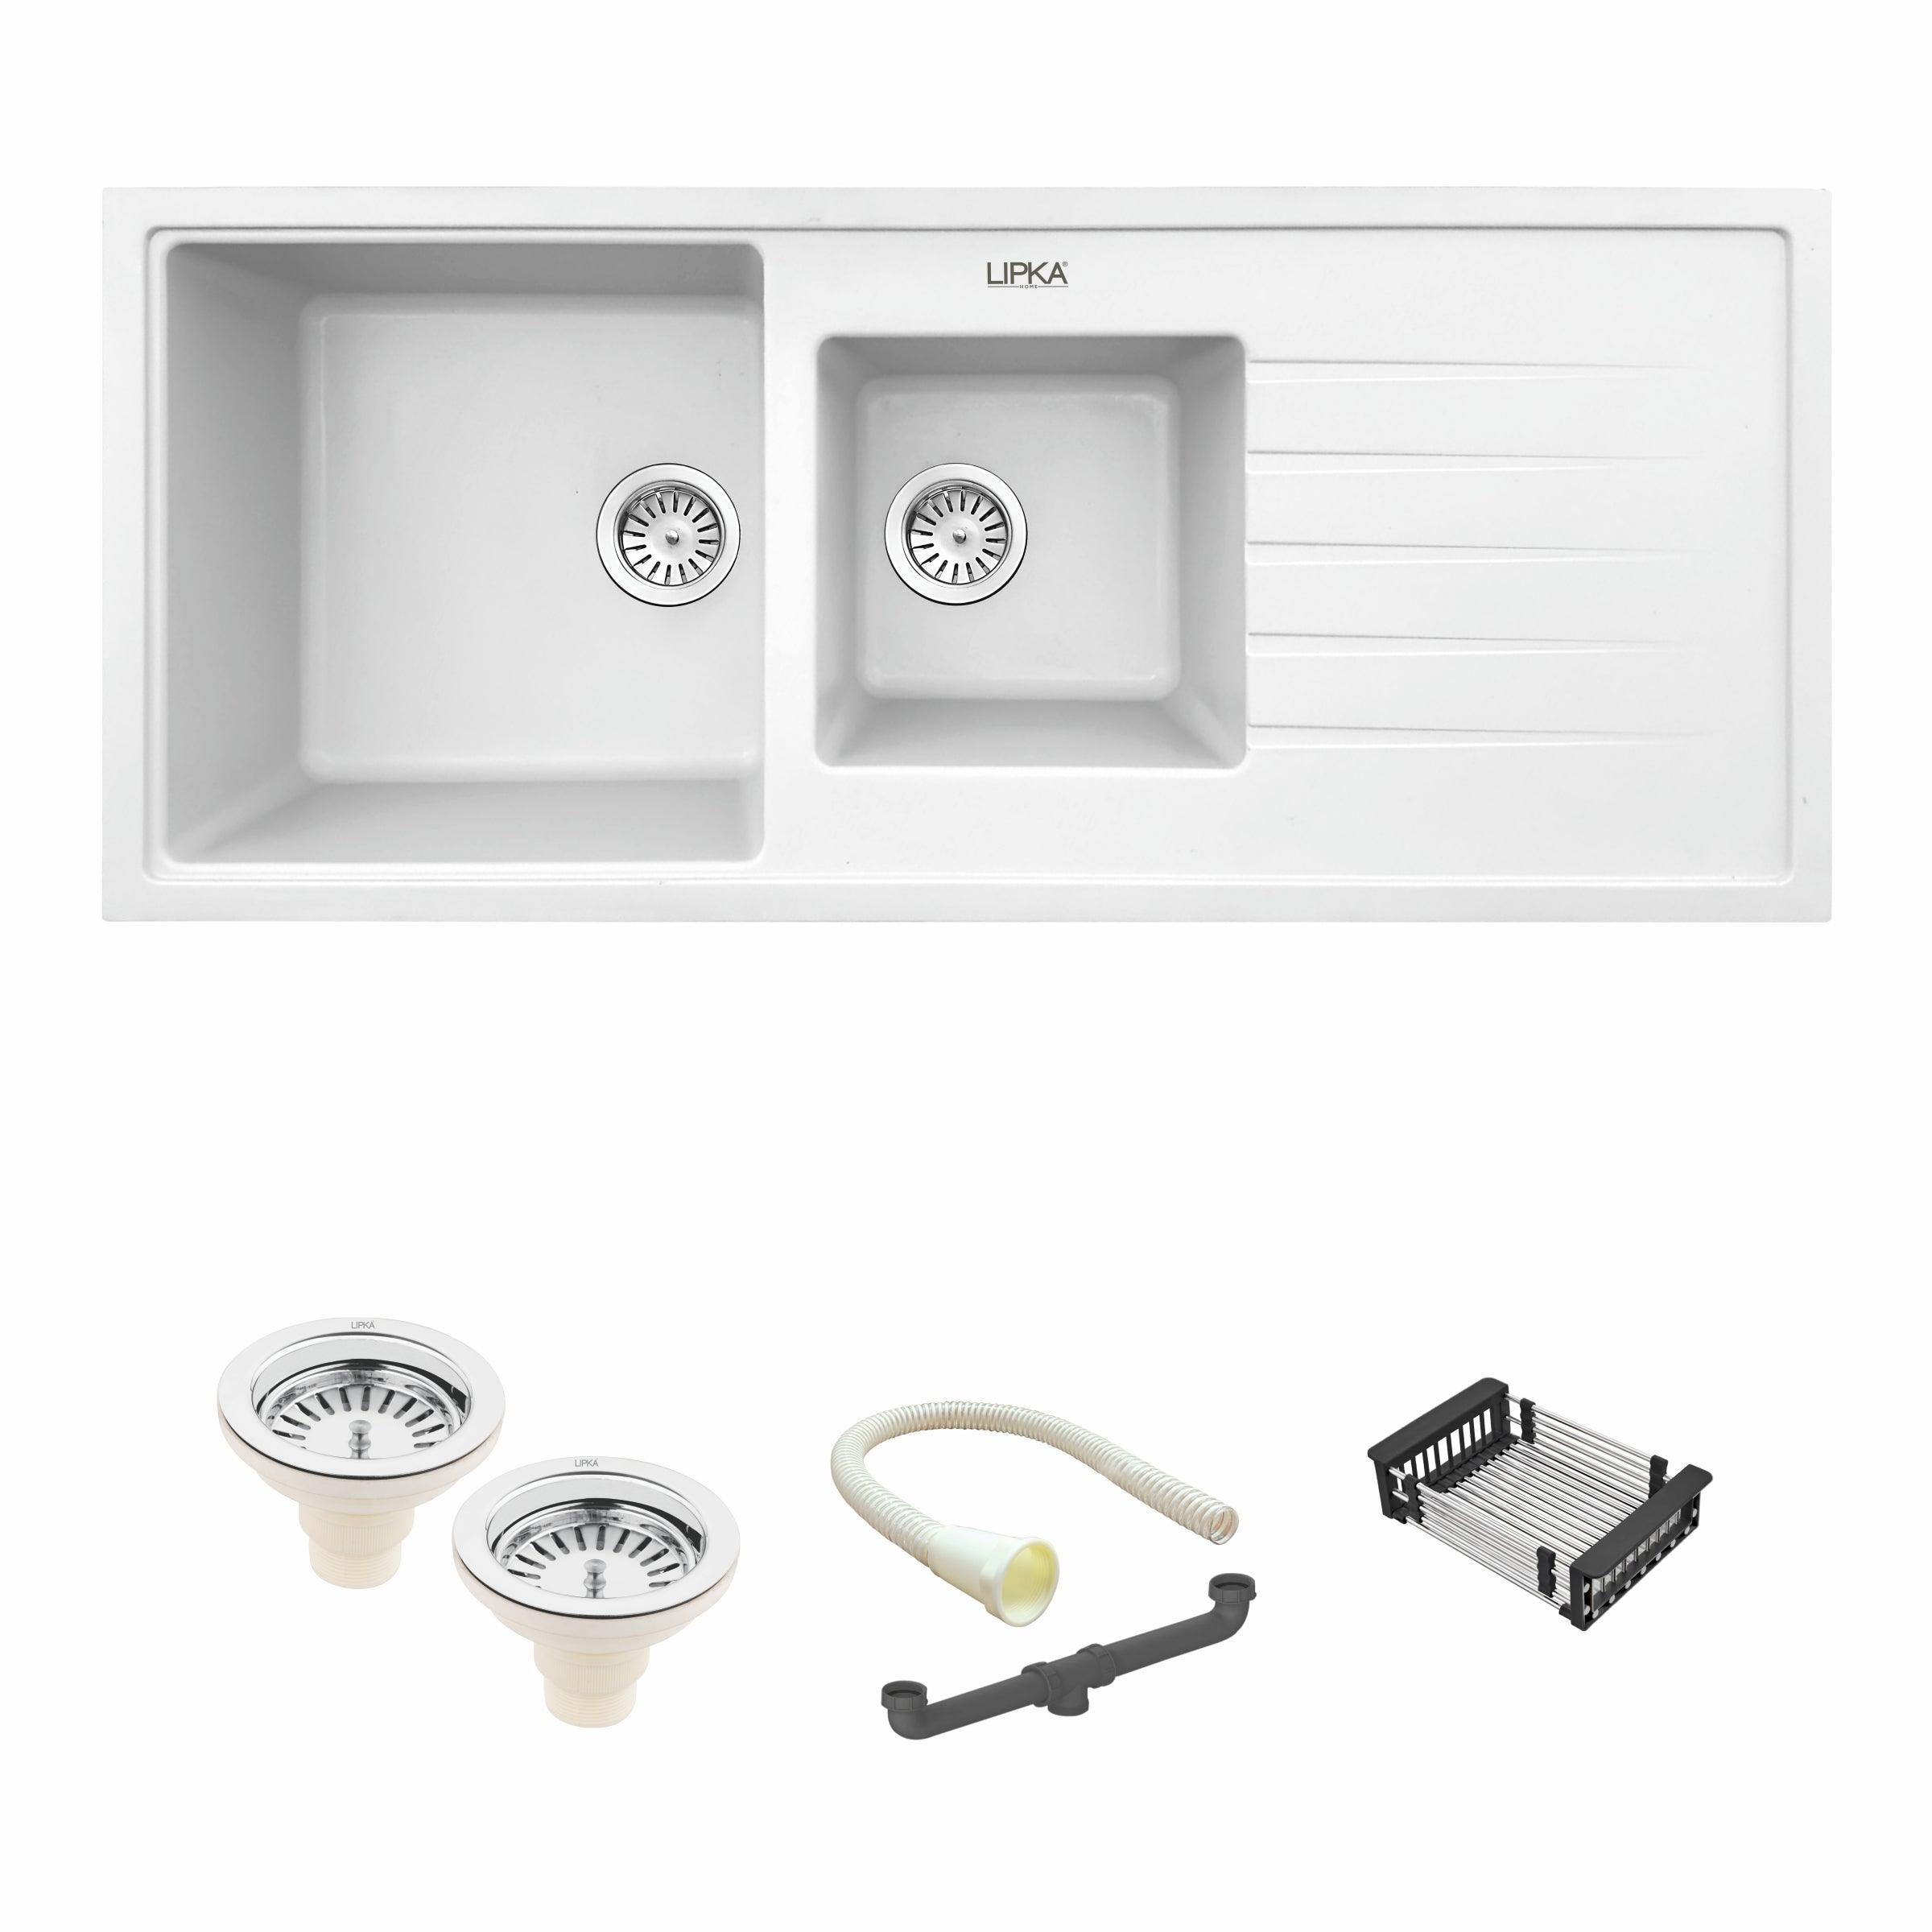 Crystal White Double Bowl with Drainboard Kitchen Sink (45 x 20 x 9 Inches) - LIPKA - Lipka Home